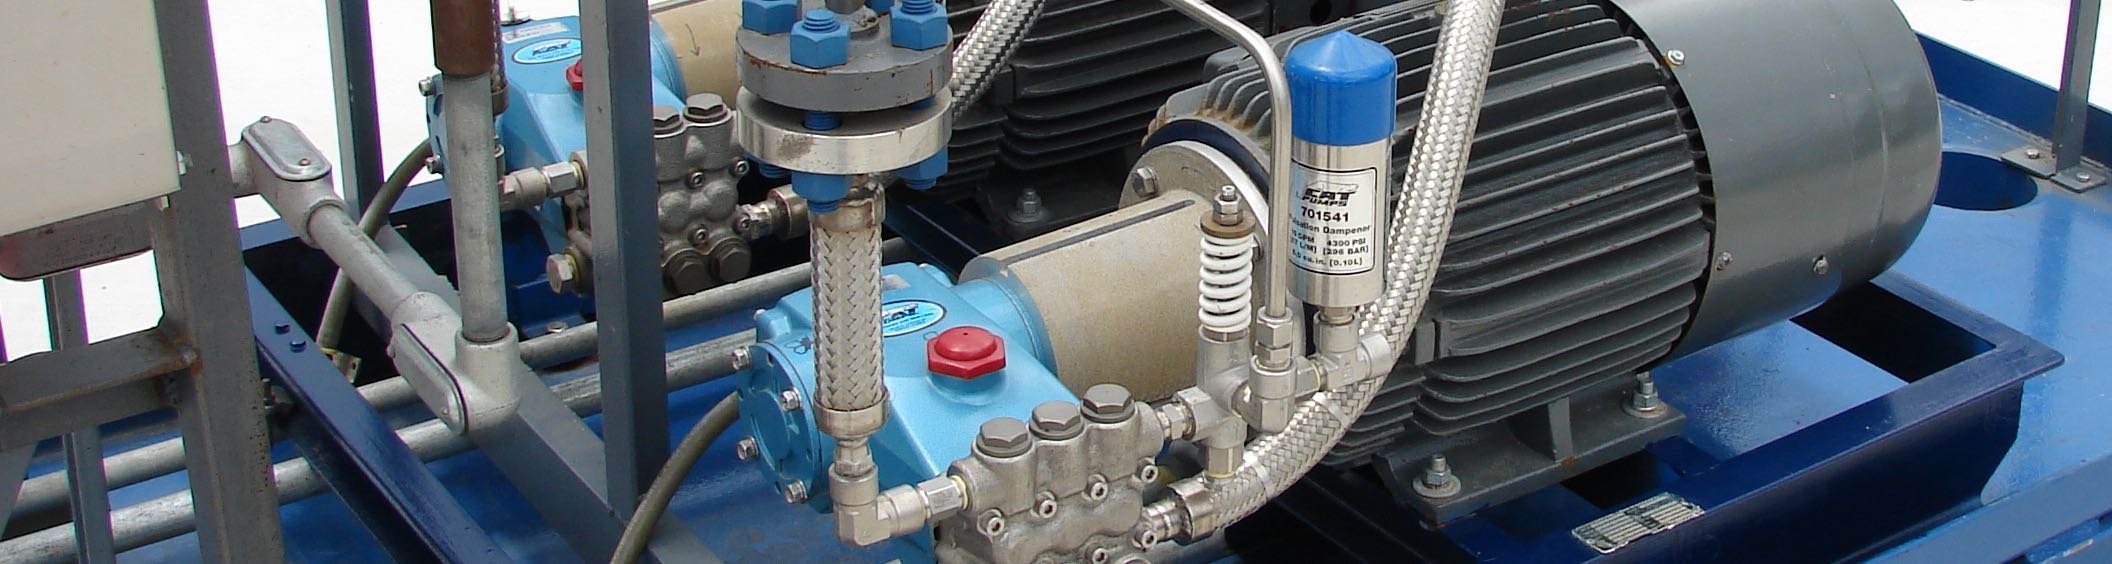 Dual DMDS Injection Pump